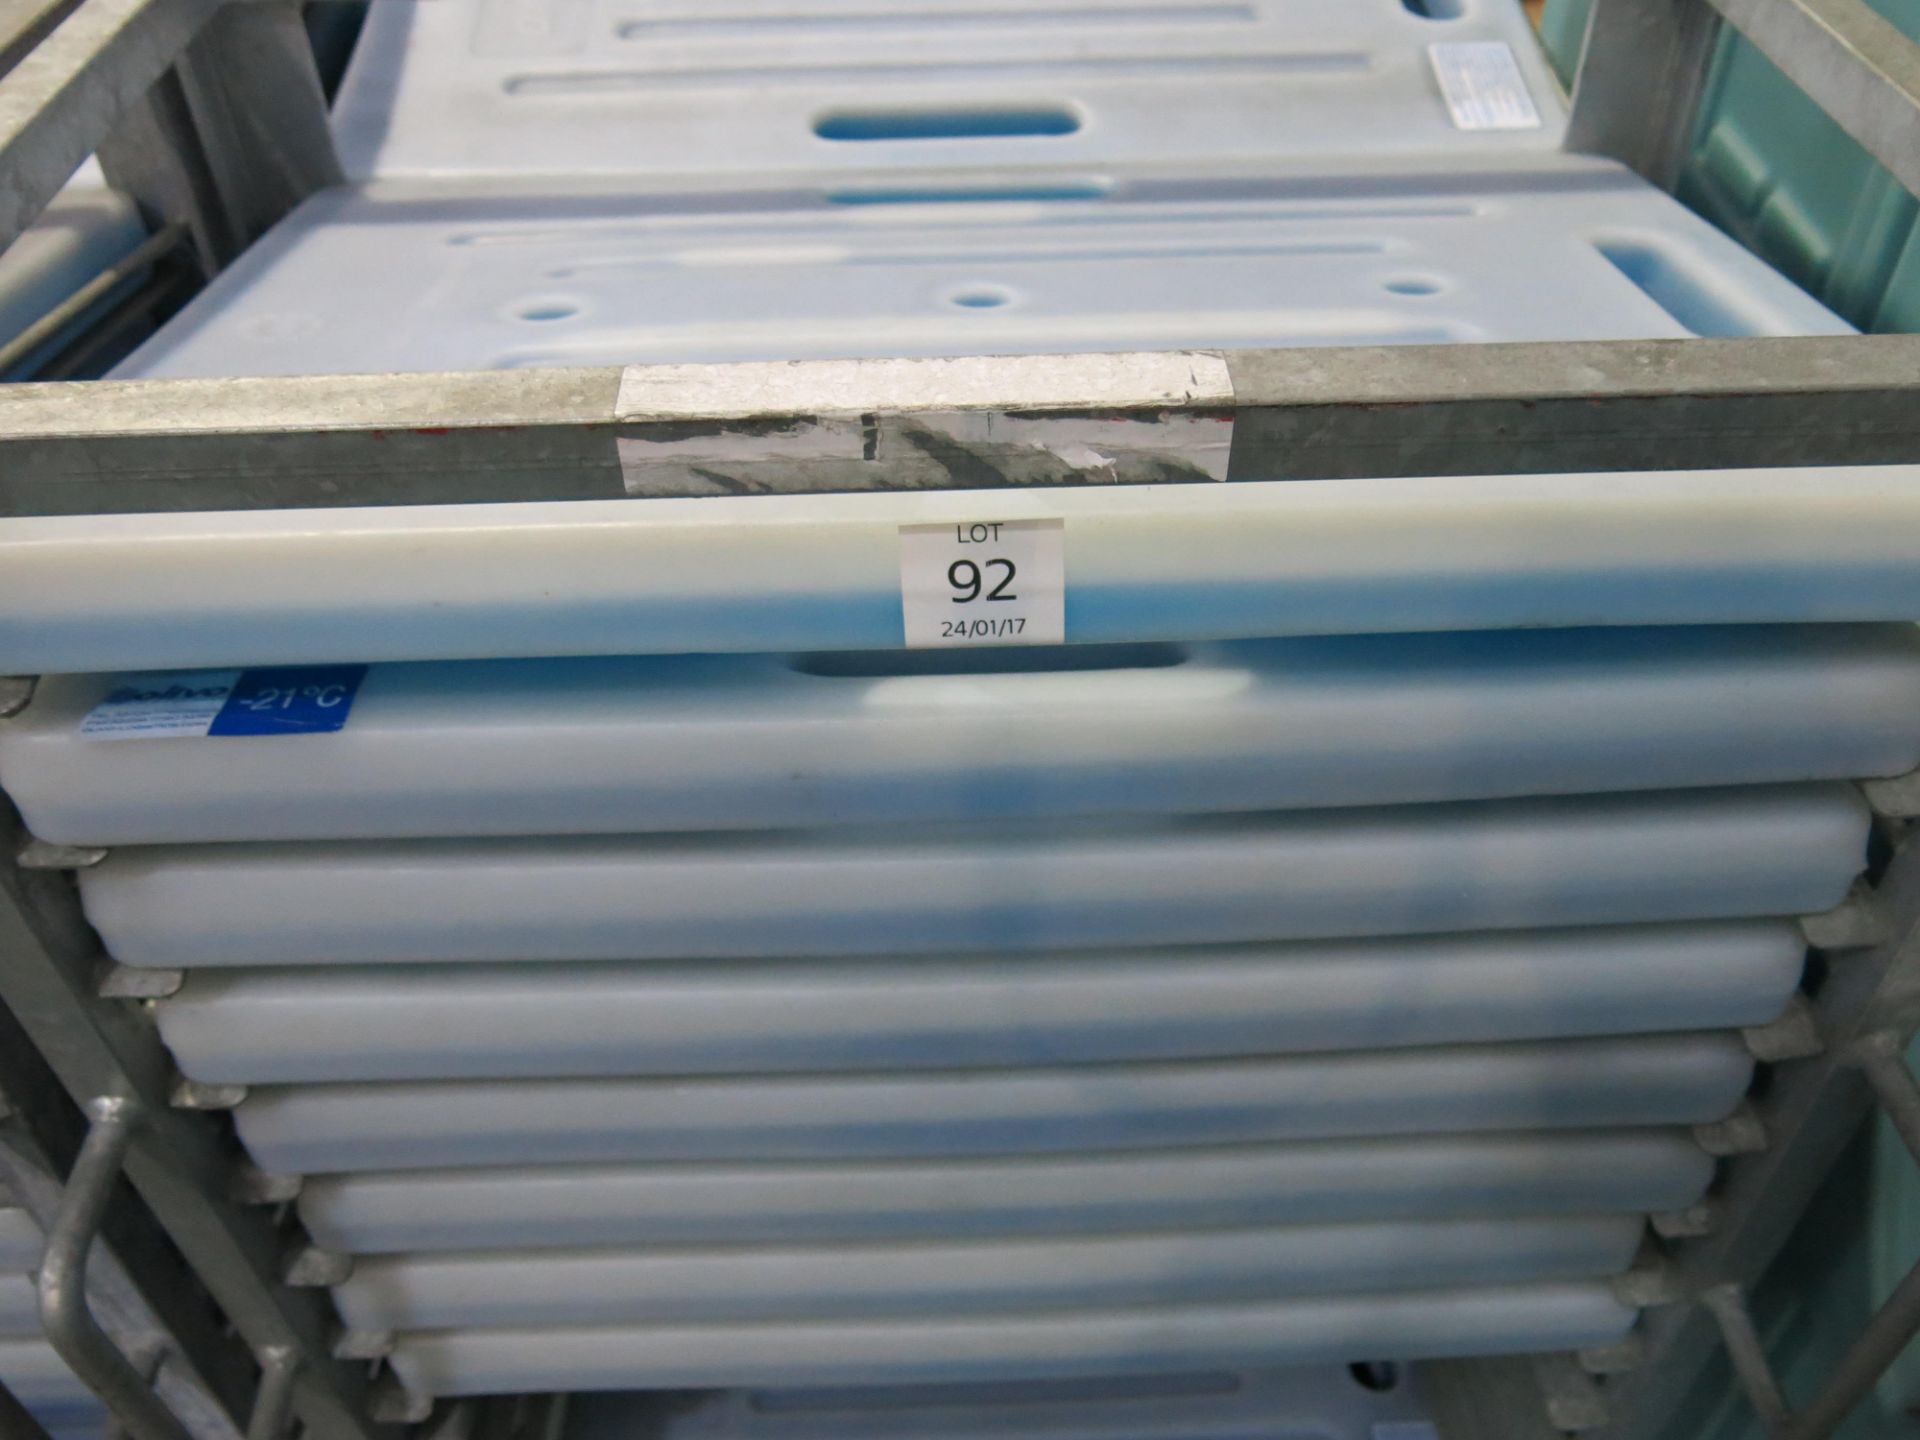 * 8 x Eutectic Thermo Plates, specified to chill to -21°C